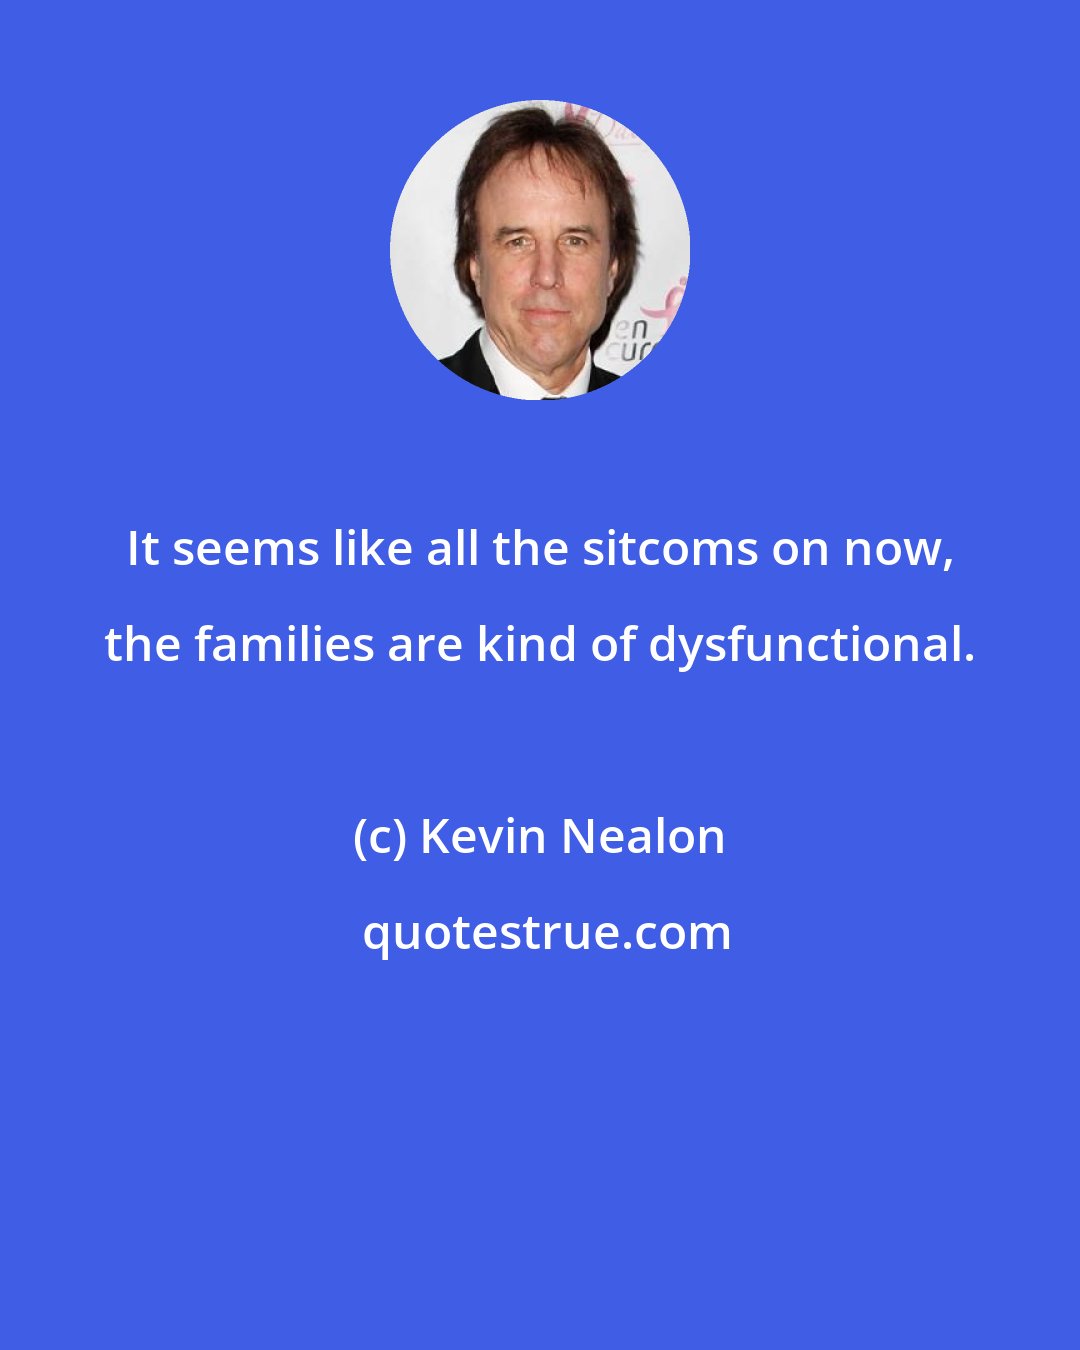 Kevin Nealon: It seems like all the sitcoms on now, the families are kind of dysfunctional.